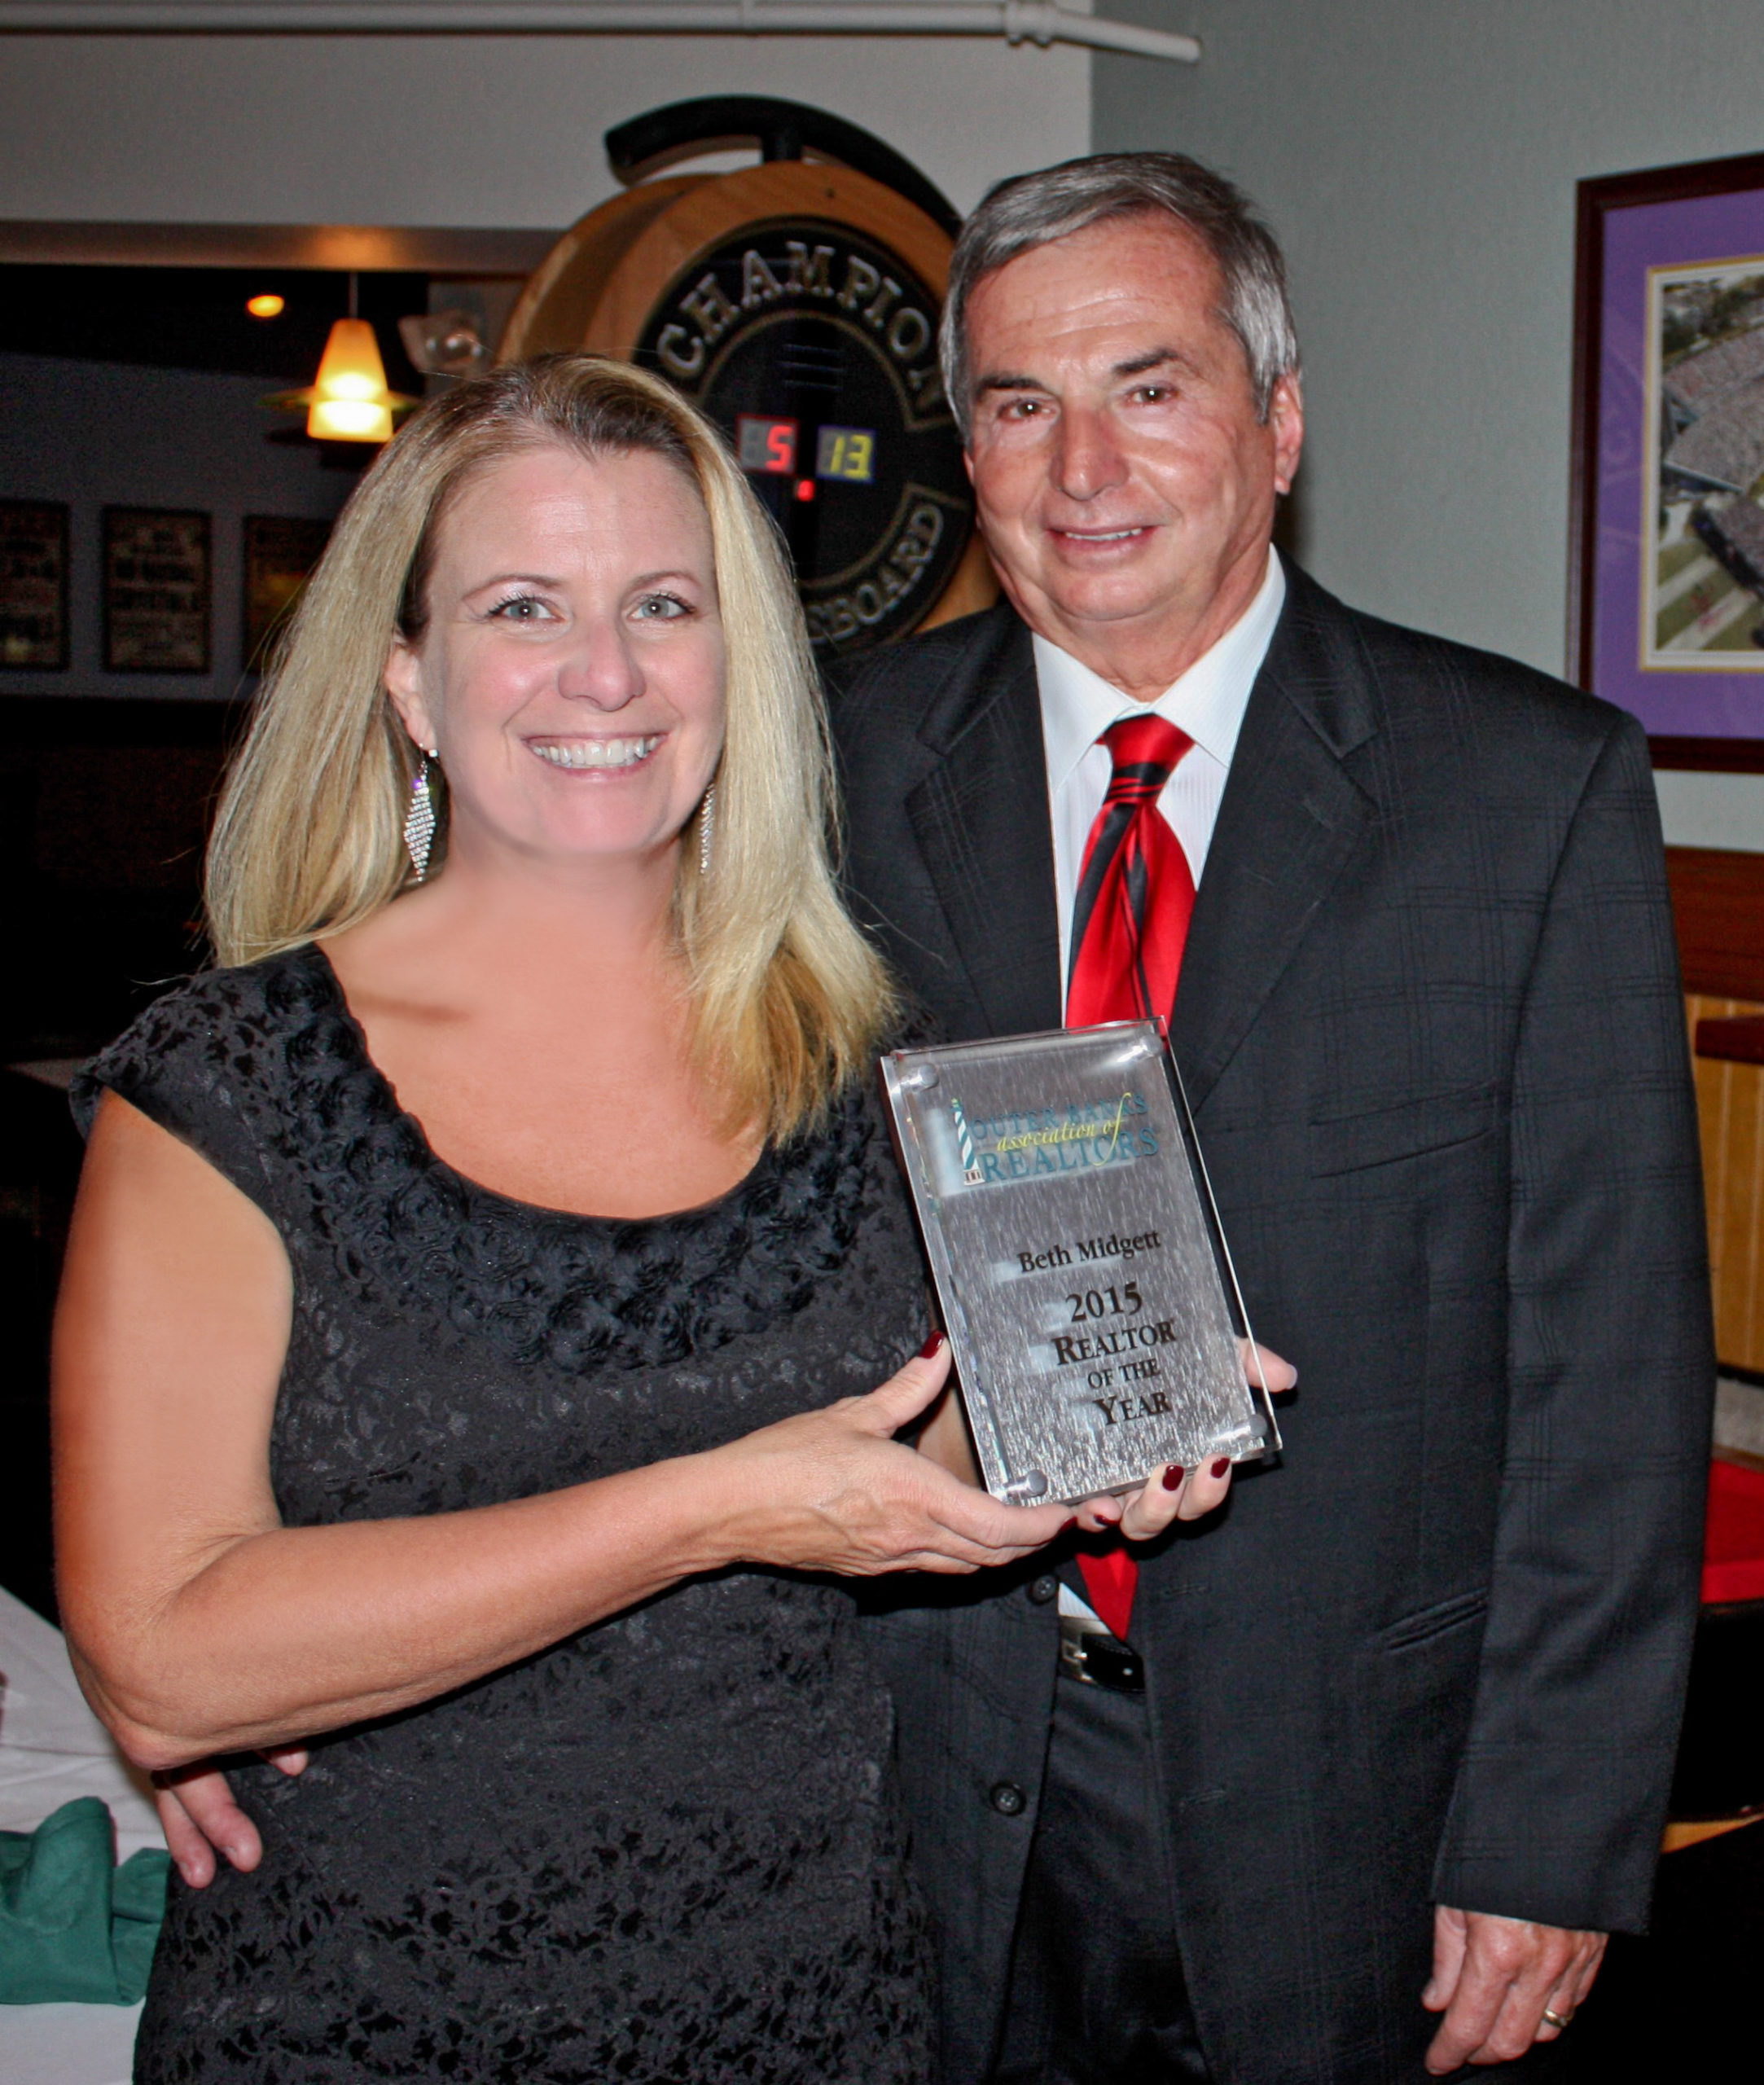 Beth Midgett accepts award for the 2015 REALTOR® of the Year 